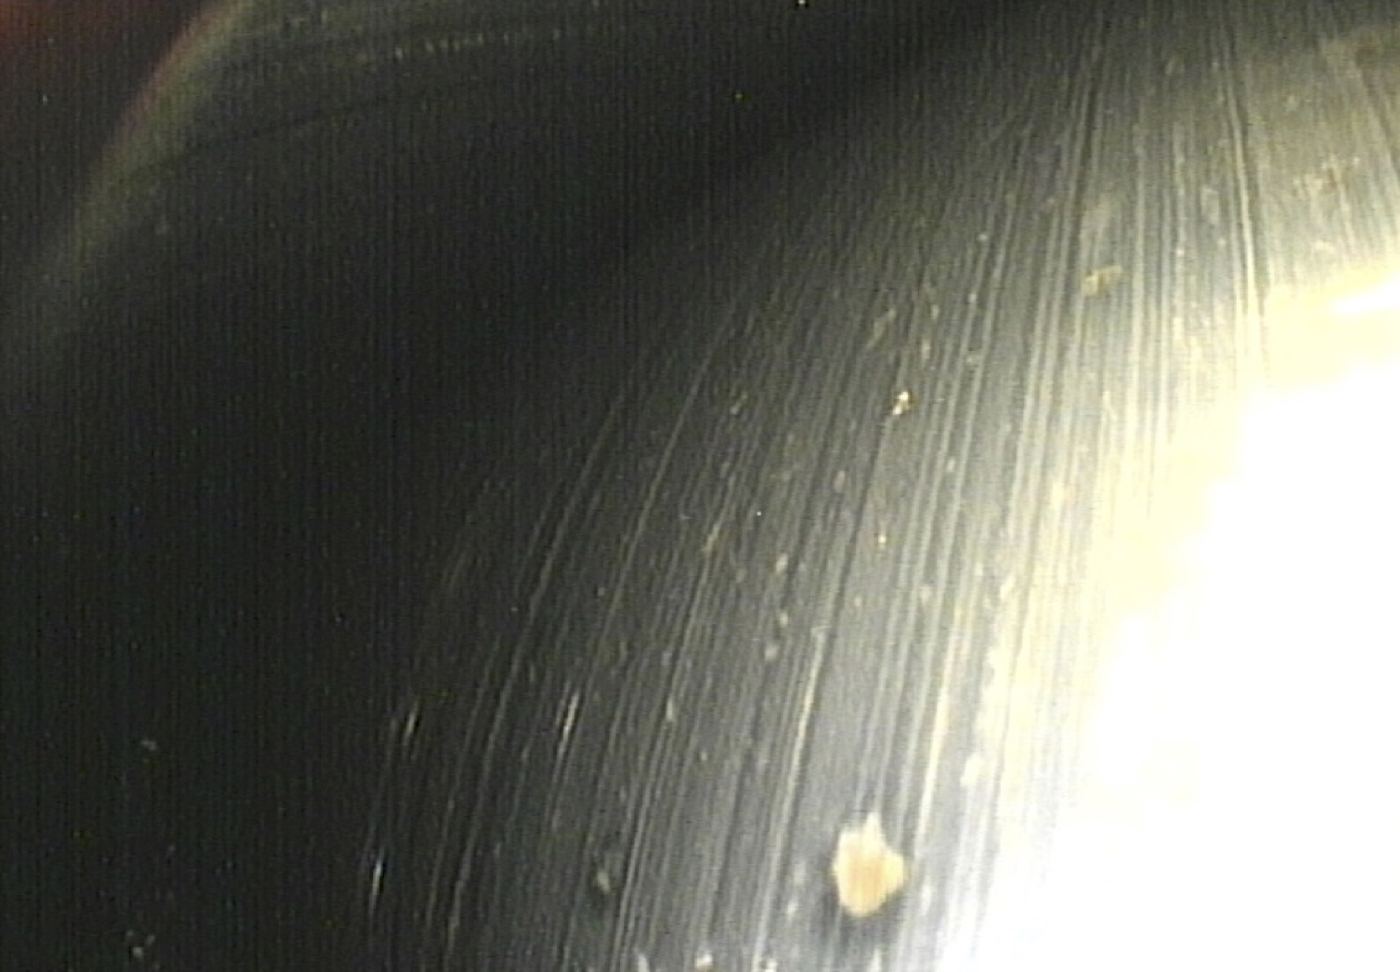 image 2 - typical image of surface damage to a roller bearing element